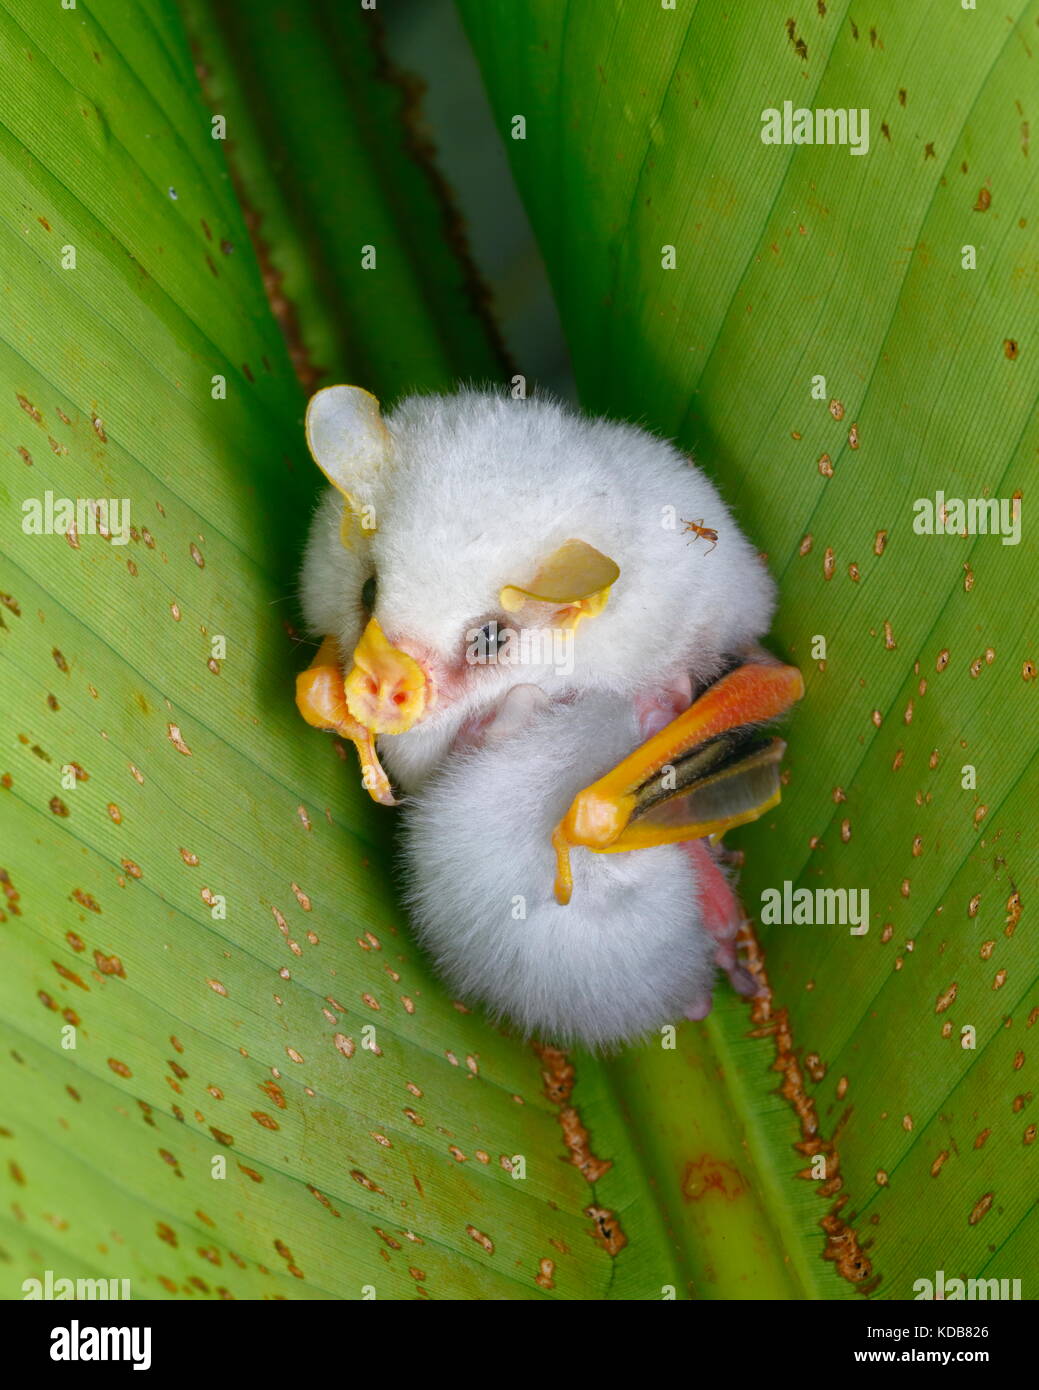 Mother and baby Honduran white bats, Ectophylla alba, sheltered under a heliconia plant leaf. Stock Photo